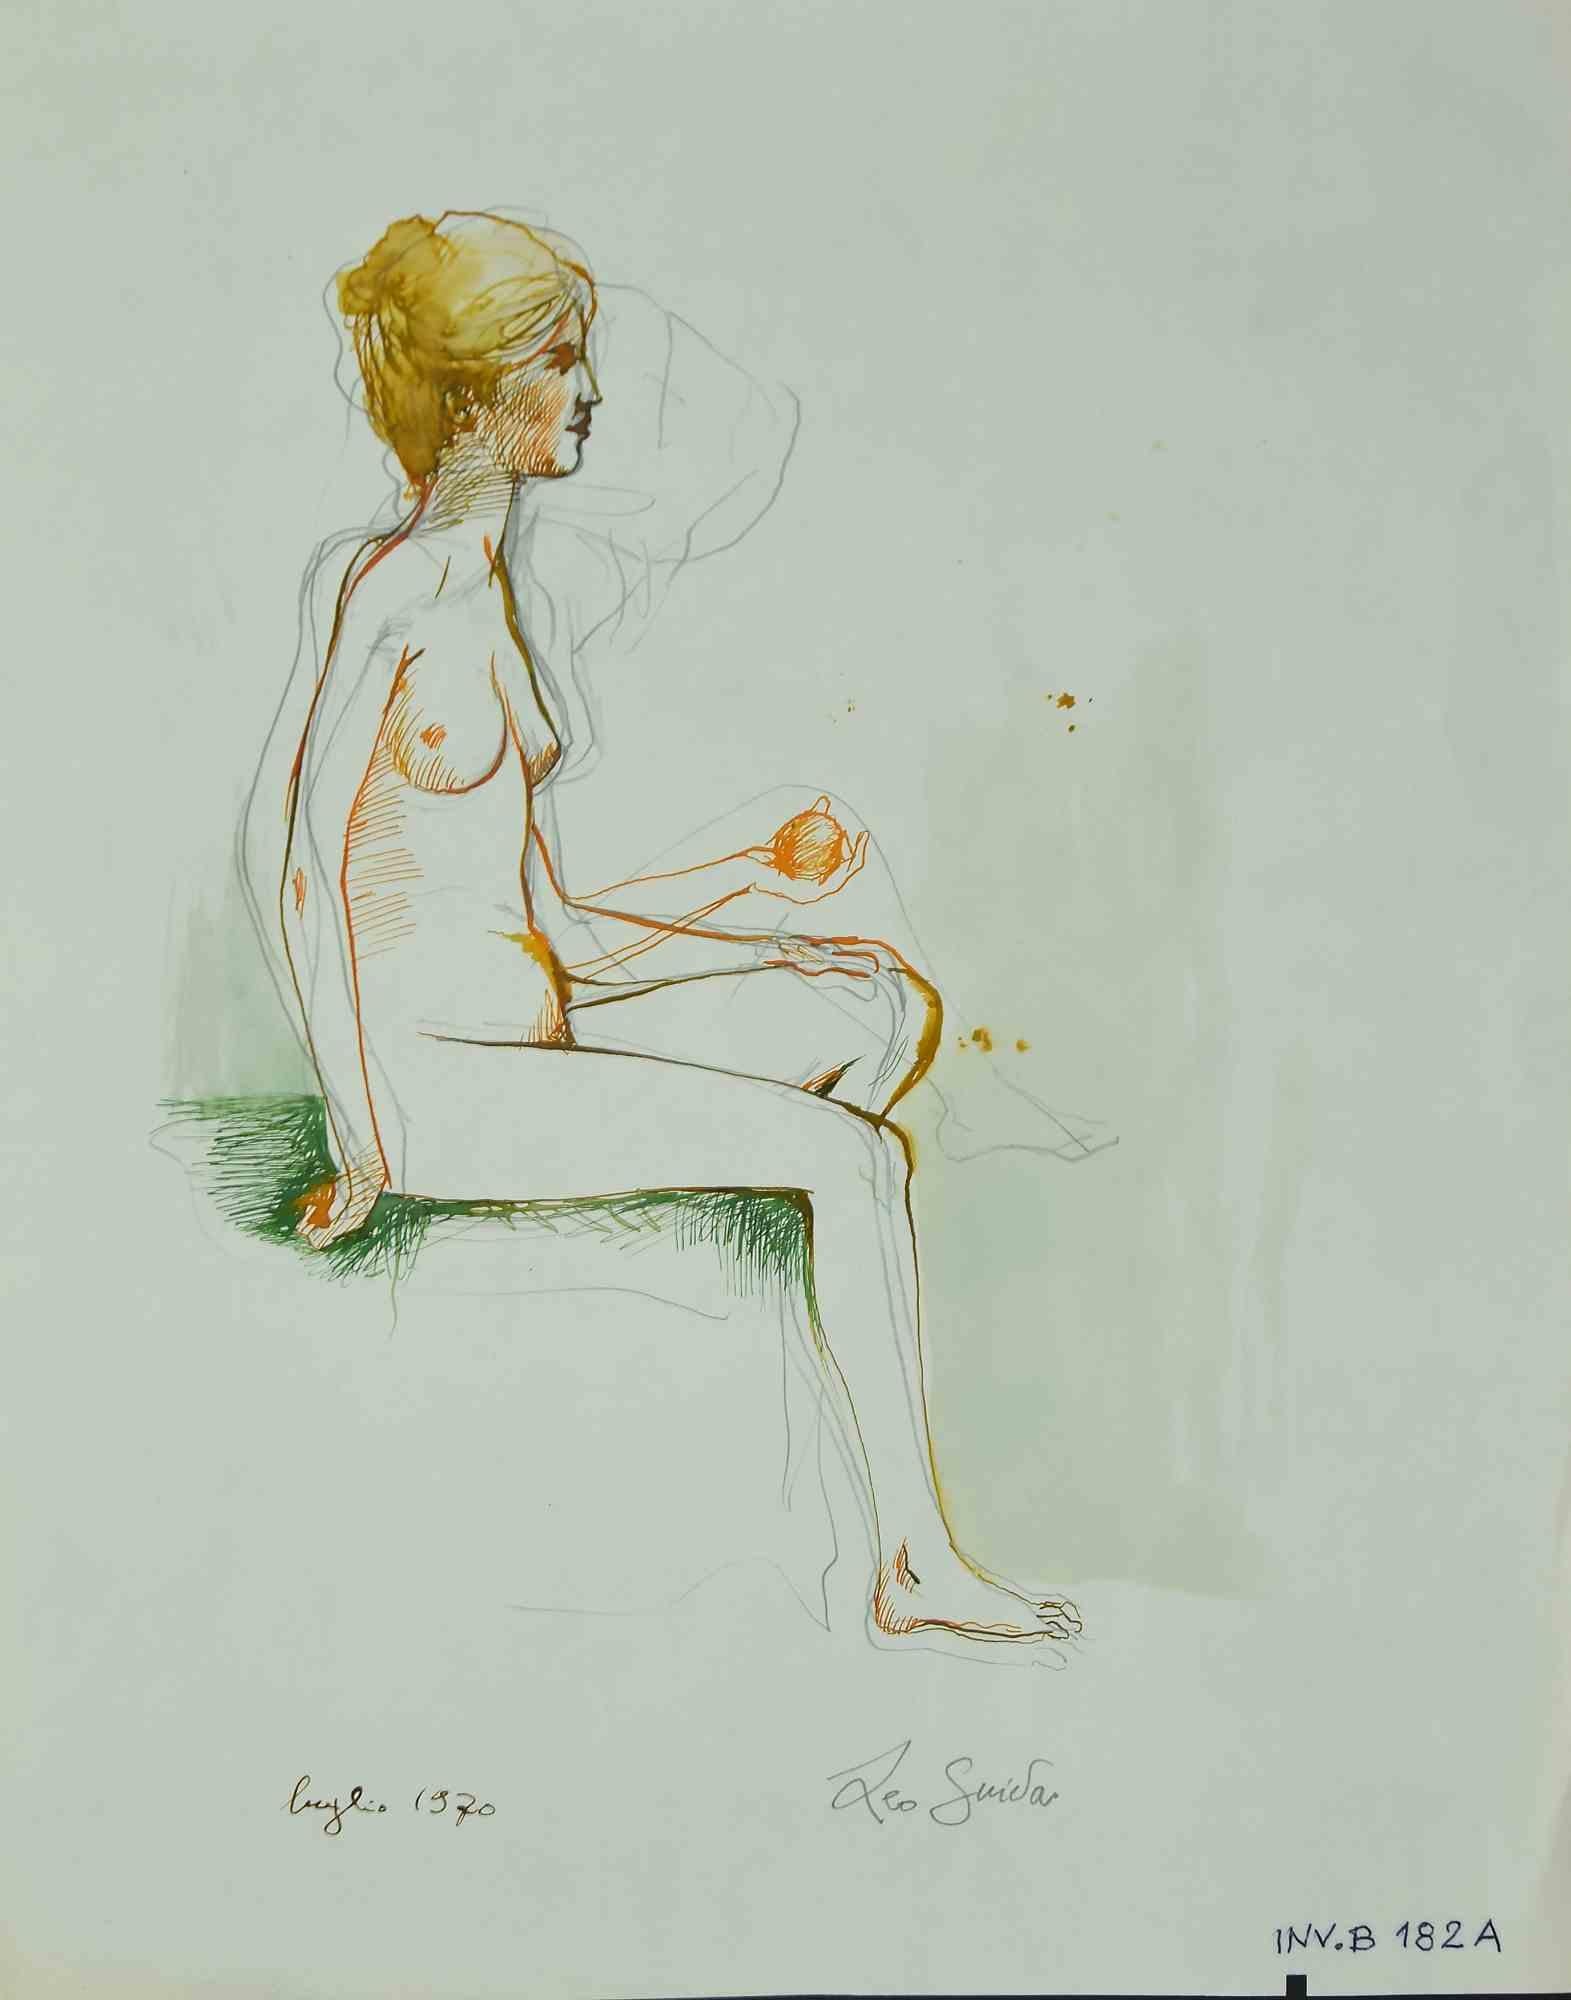 Nude is an original artwork realized  in 1970 by the italian Contemporary artist  Leo Guida  (1992 - 2017).

Original drawing in China ink and watercolor on ivory-colored paper.

Hand-signed and dated on the lower margins. 

Excellent conditions.